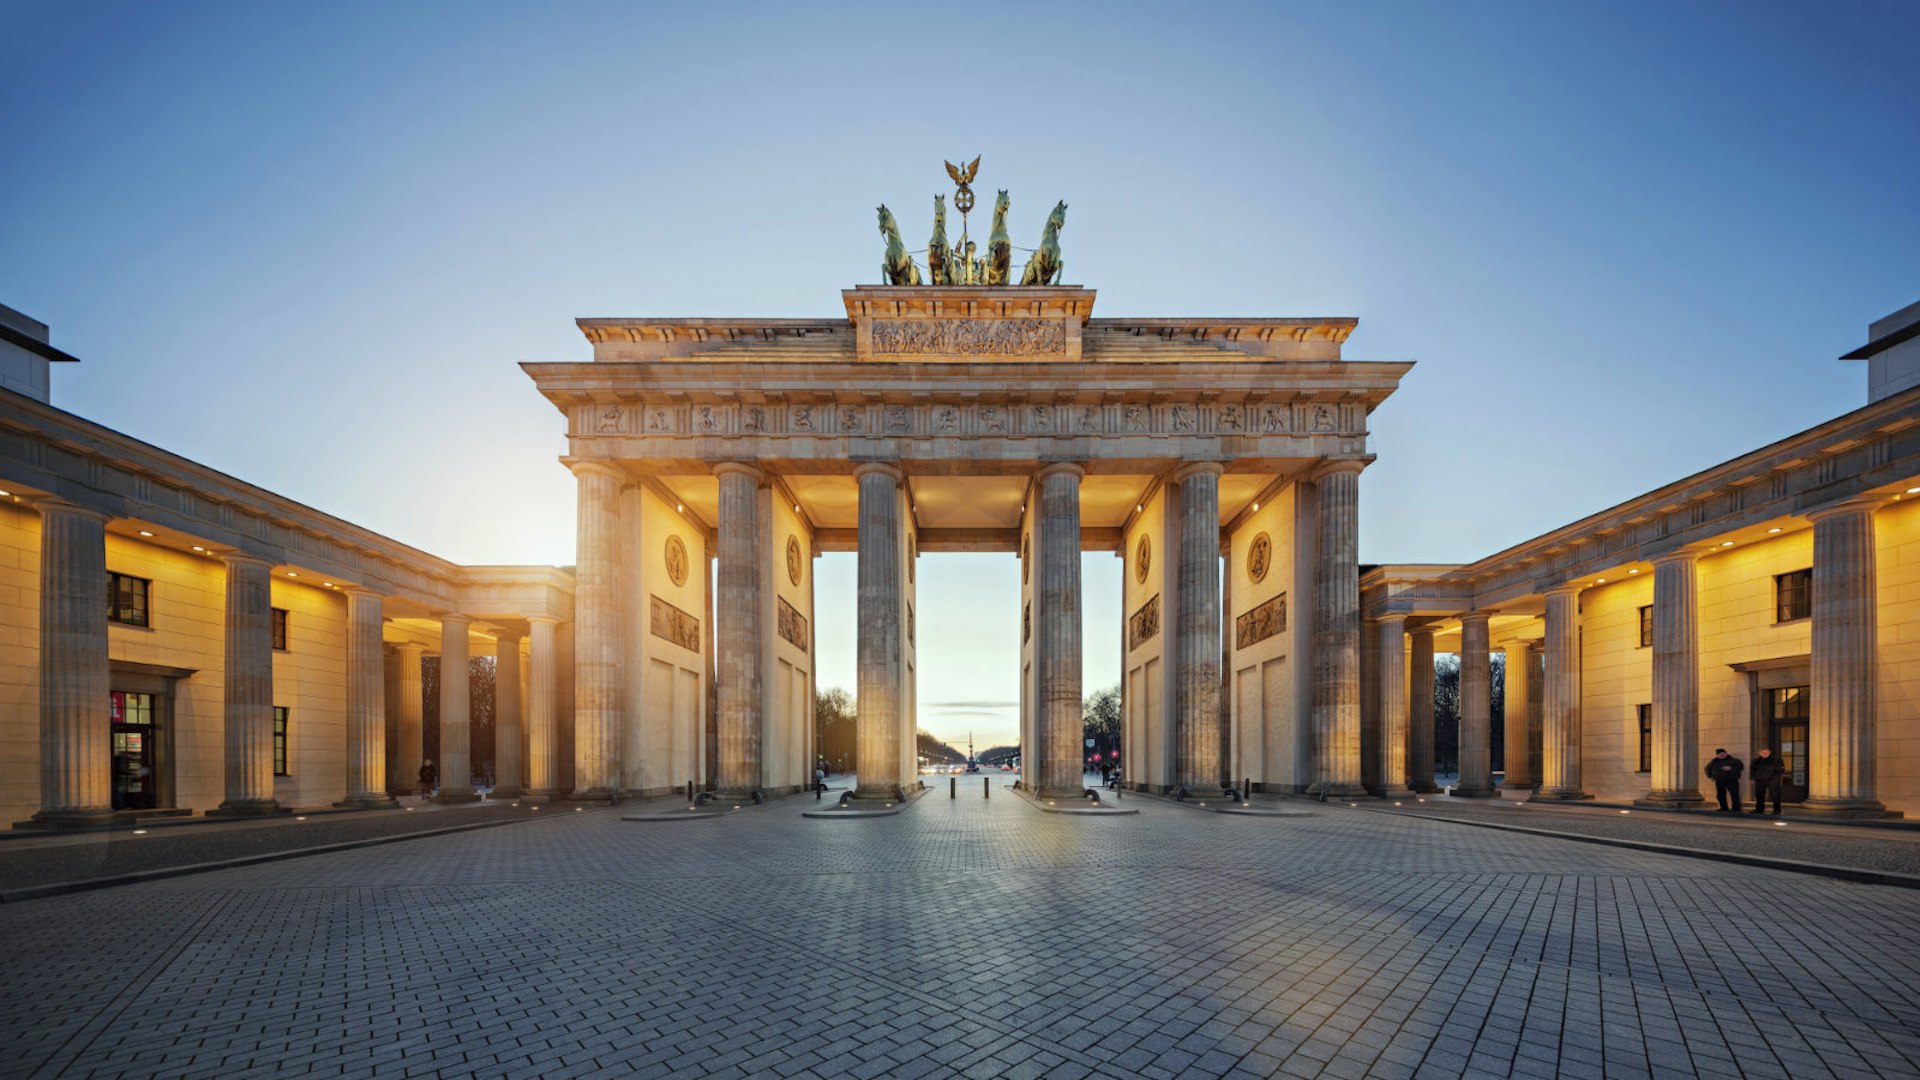 Tony Wheeler's top 10 cities - Sunset at Brandenburg Gate, Berlin © RICOWde / Getty Images